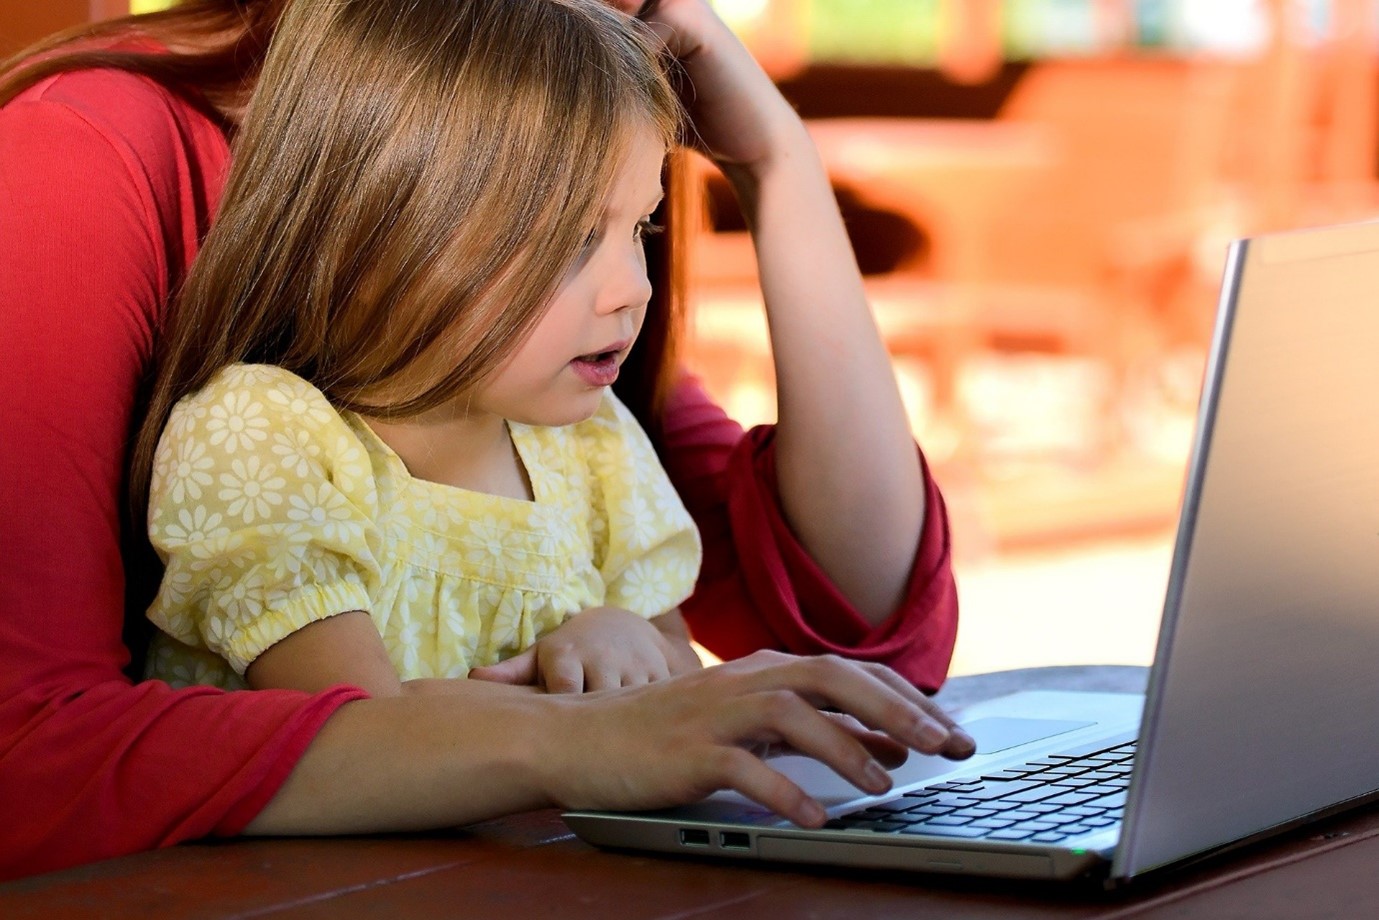 Applications That Can Help Your Child Avoid Internet Abuse